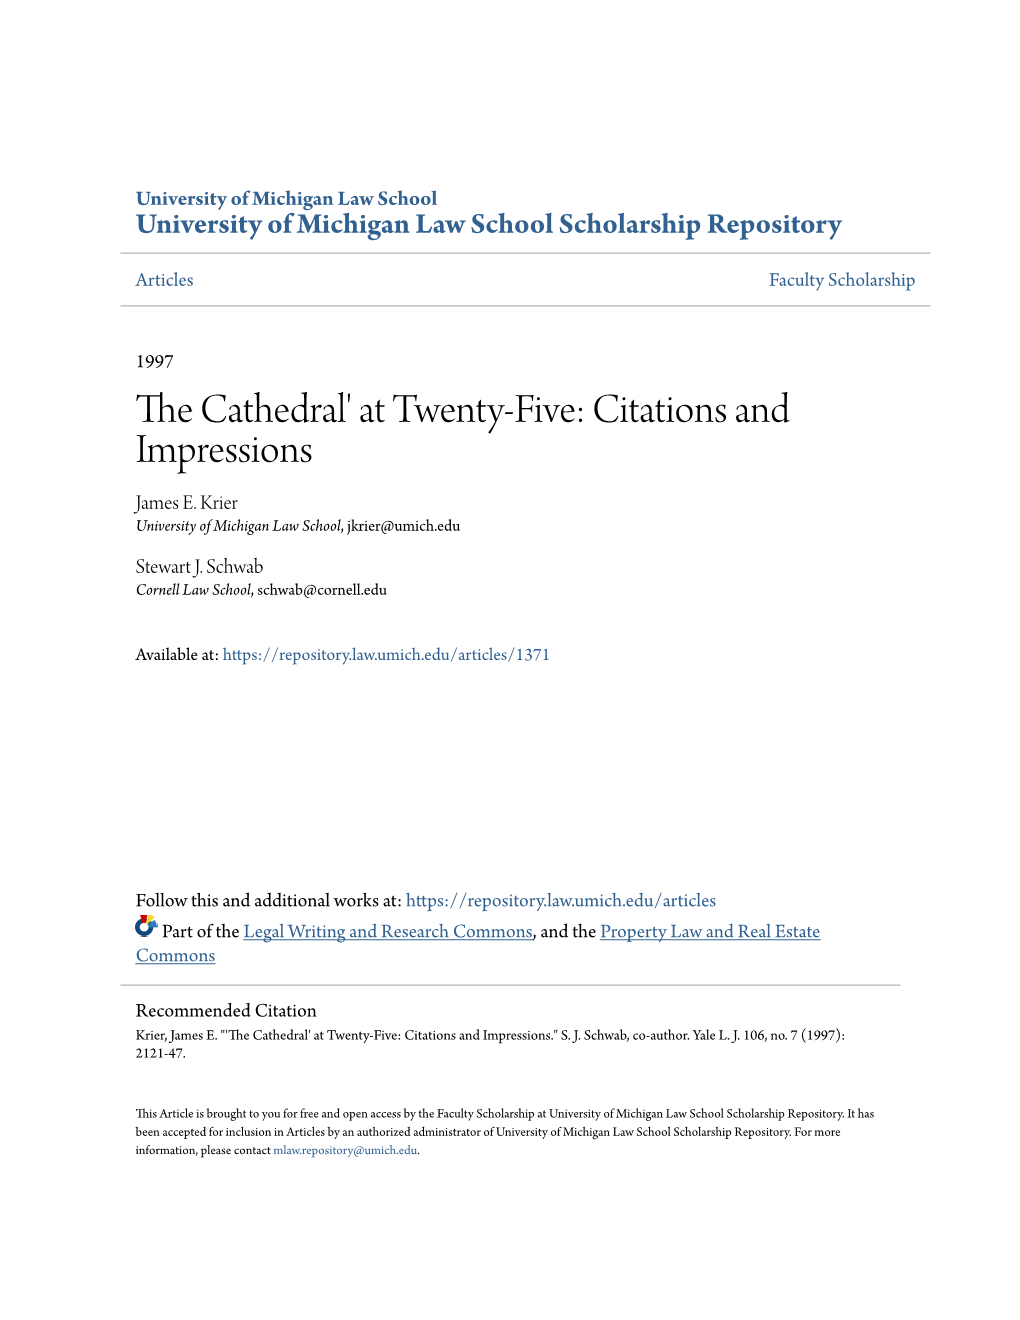 The Cathedral' at Twenty-Five: Citations and Impressions